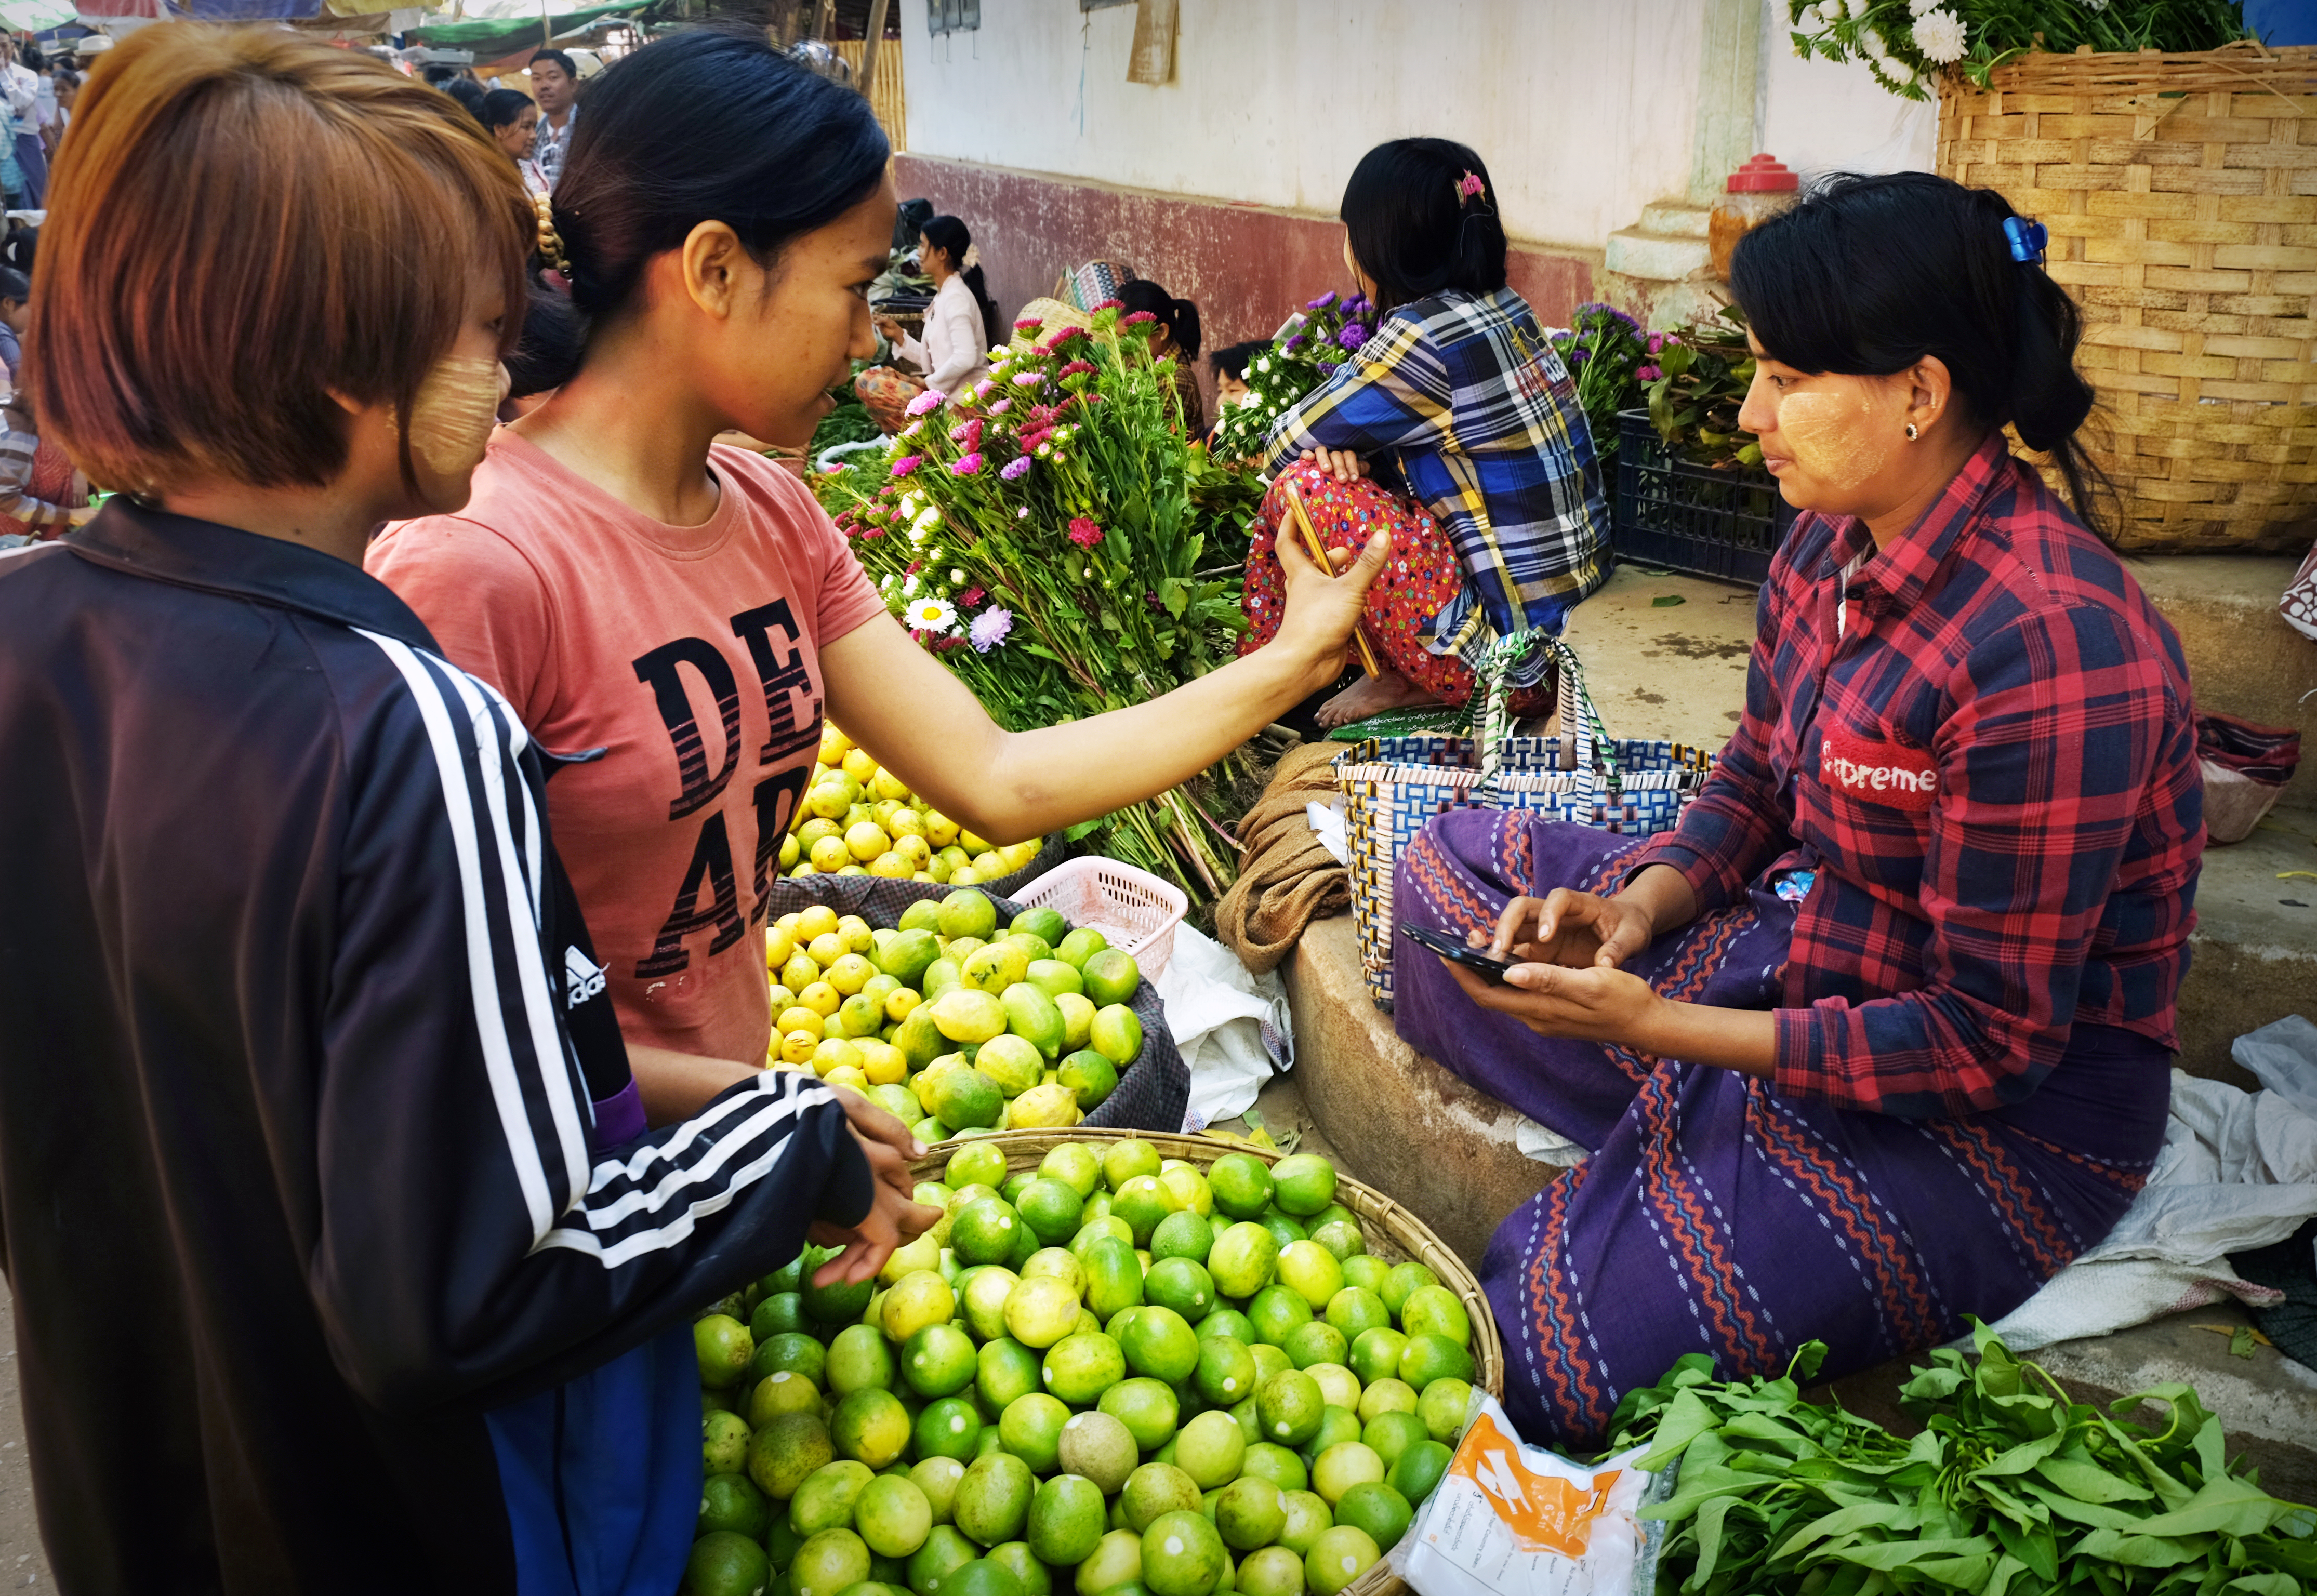 Women making a mobile payment at a local vegetable market in Bagan, Myanmar. © 2019 silentwings_M_Ghosh / Shutterstock.com